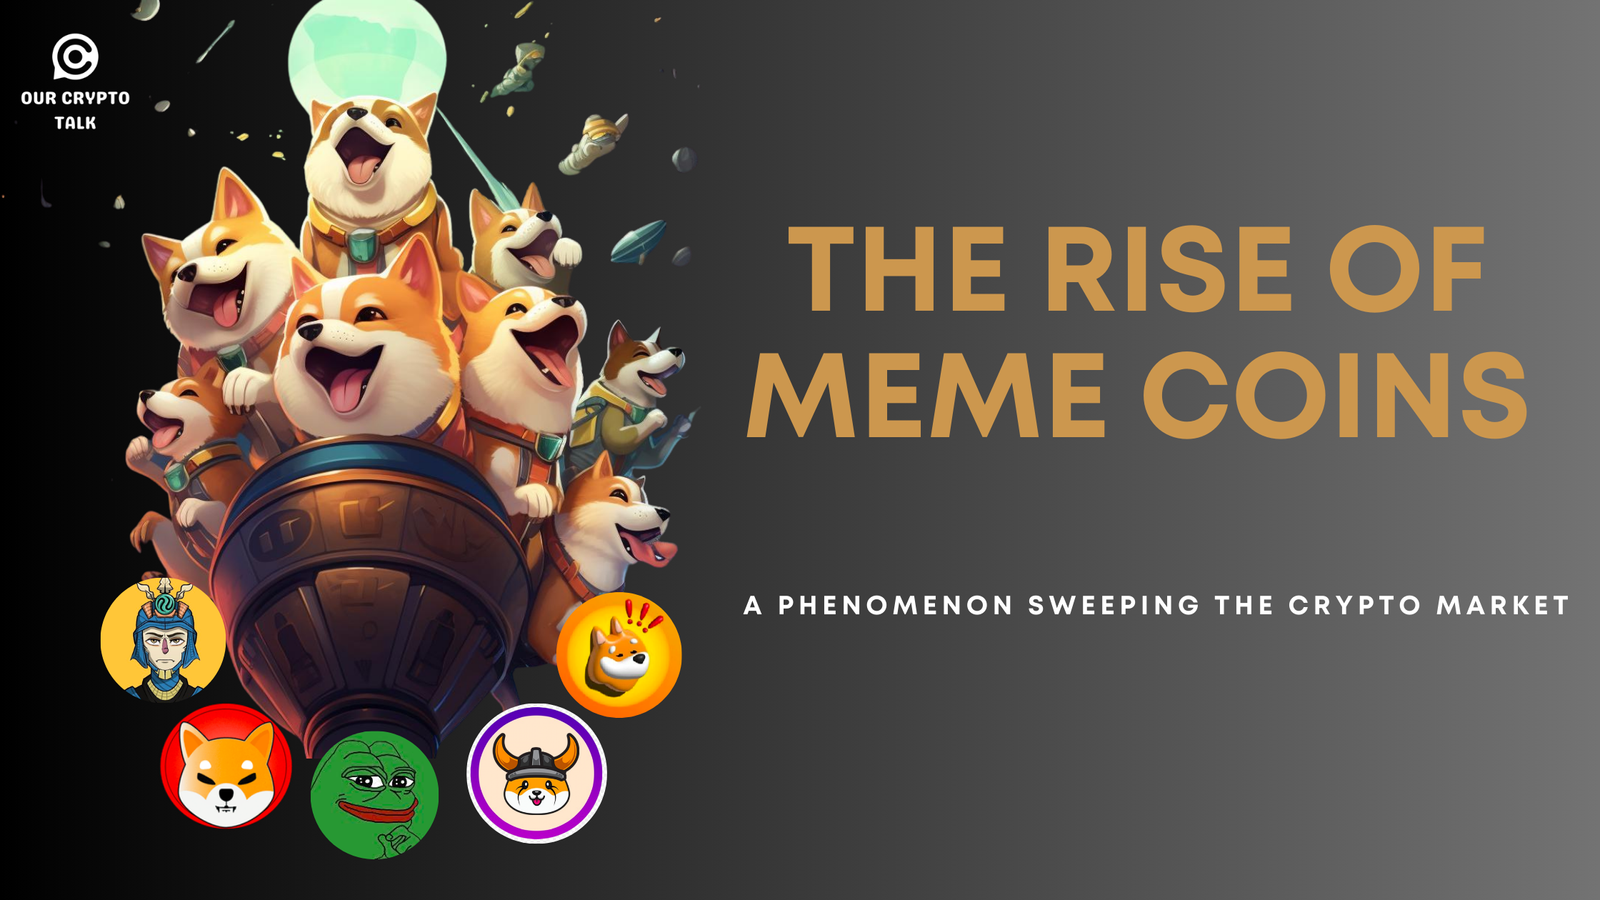 The Rise of Meme Coins